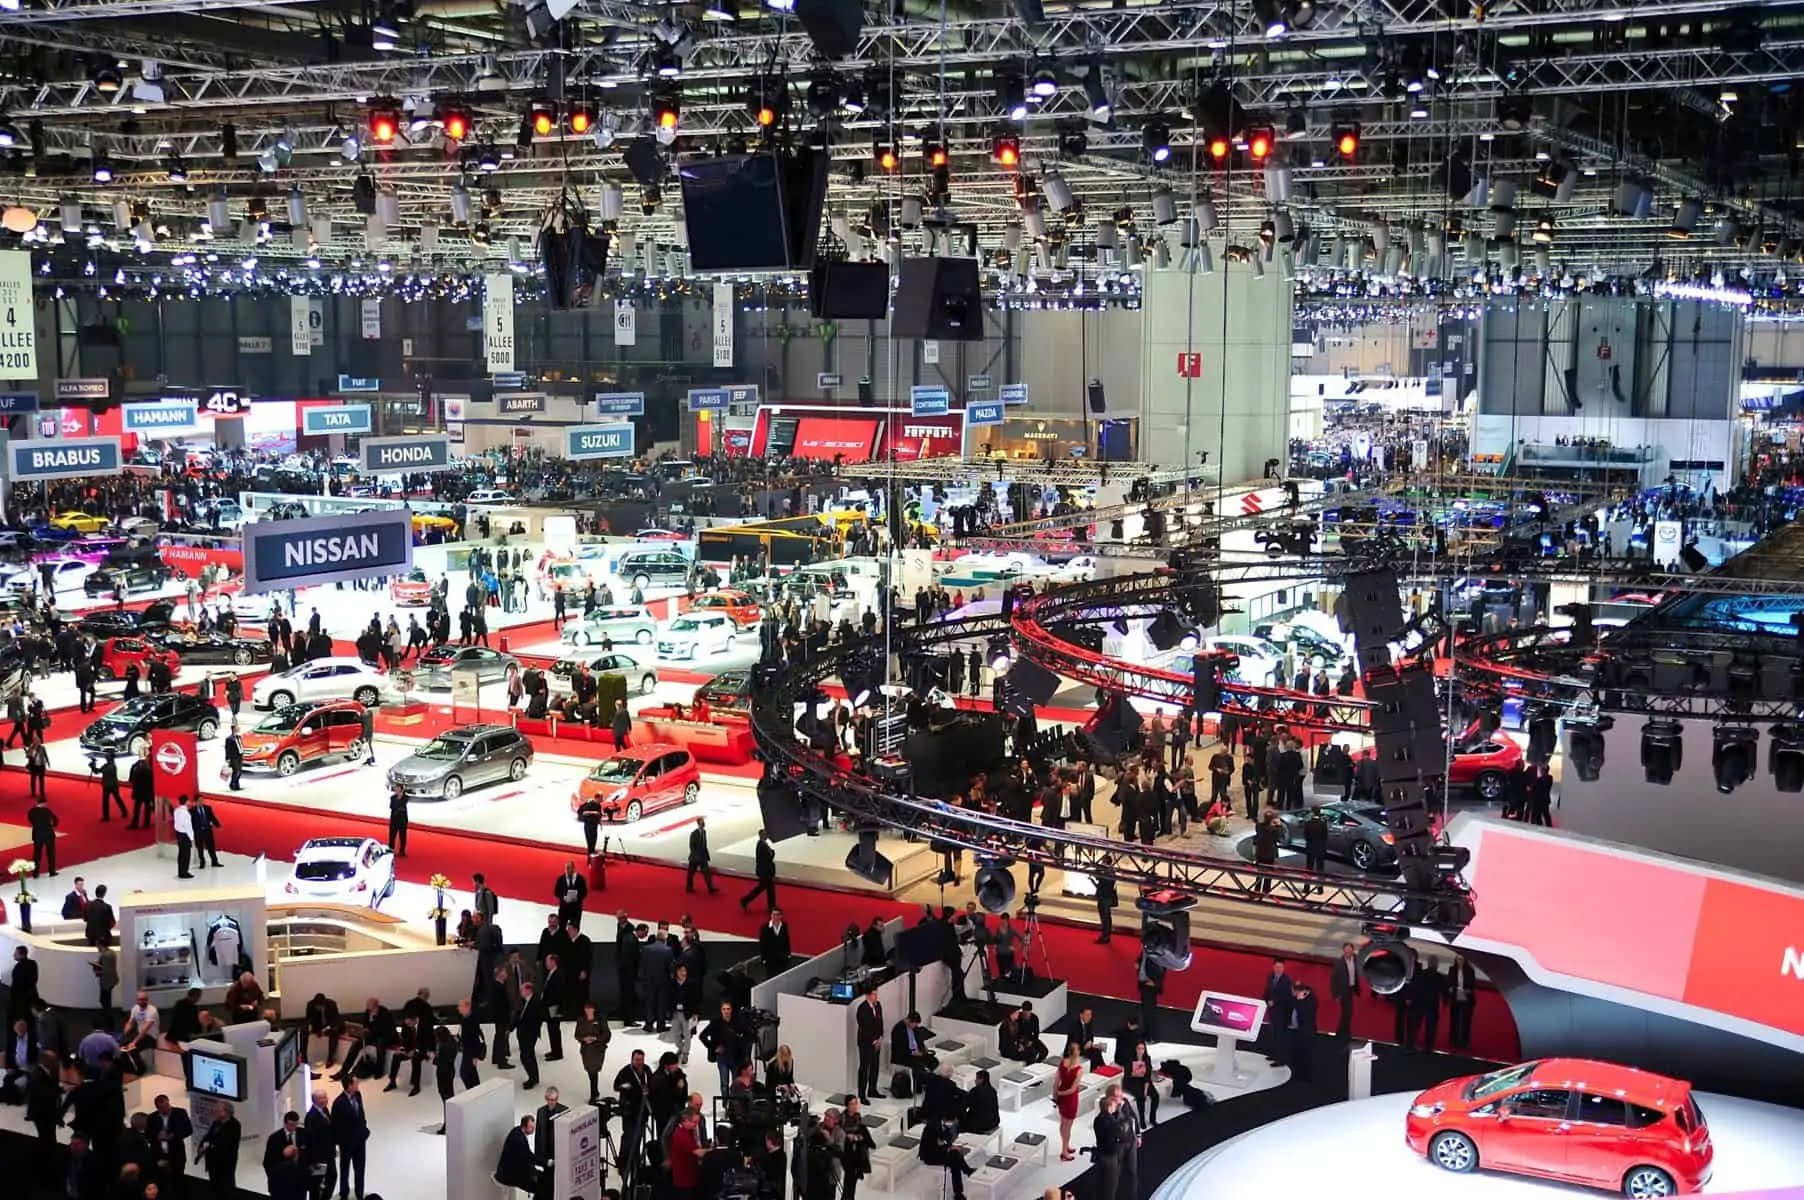 https://asapcanopy.com/wp-content/uploads/2023/10/AAPEX-Auto-Parts-and-After-Sales-Exhibition-in-Las-Vegas.jpeg